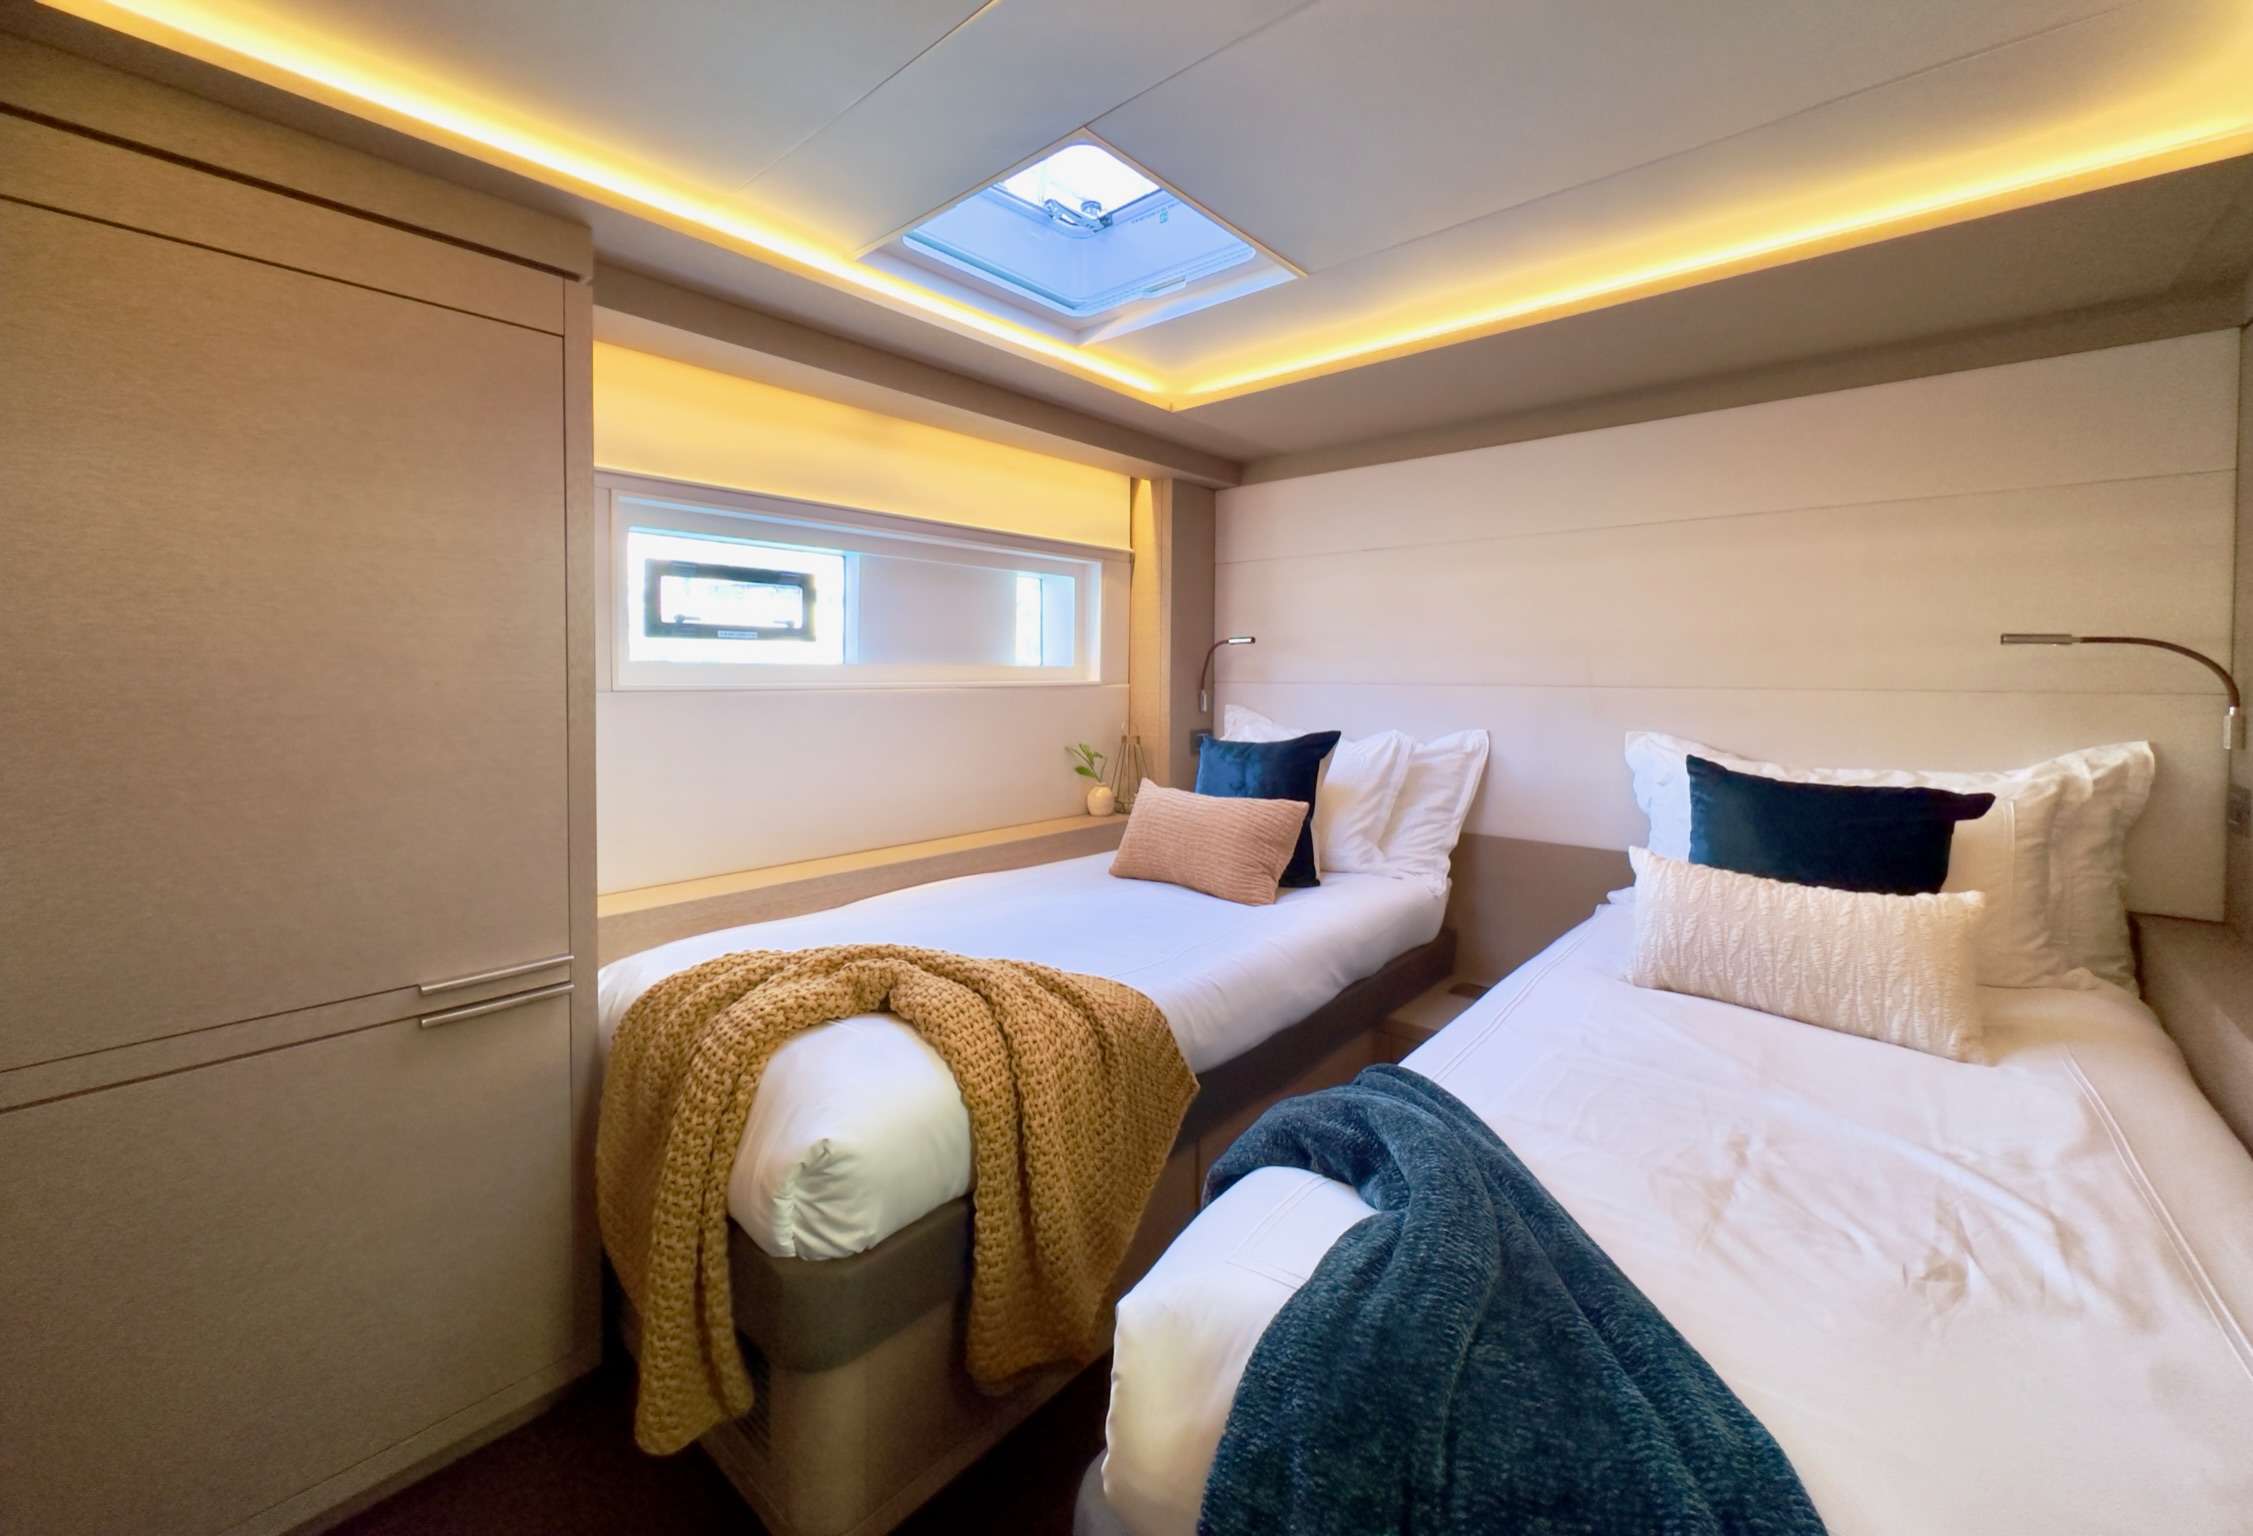 TWIN FLAME 77 Yacht Charter - Guest Stateroom with Sliding Beds